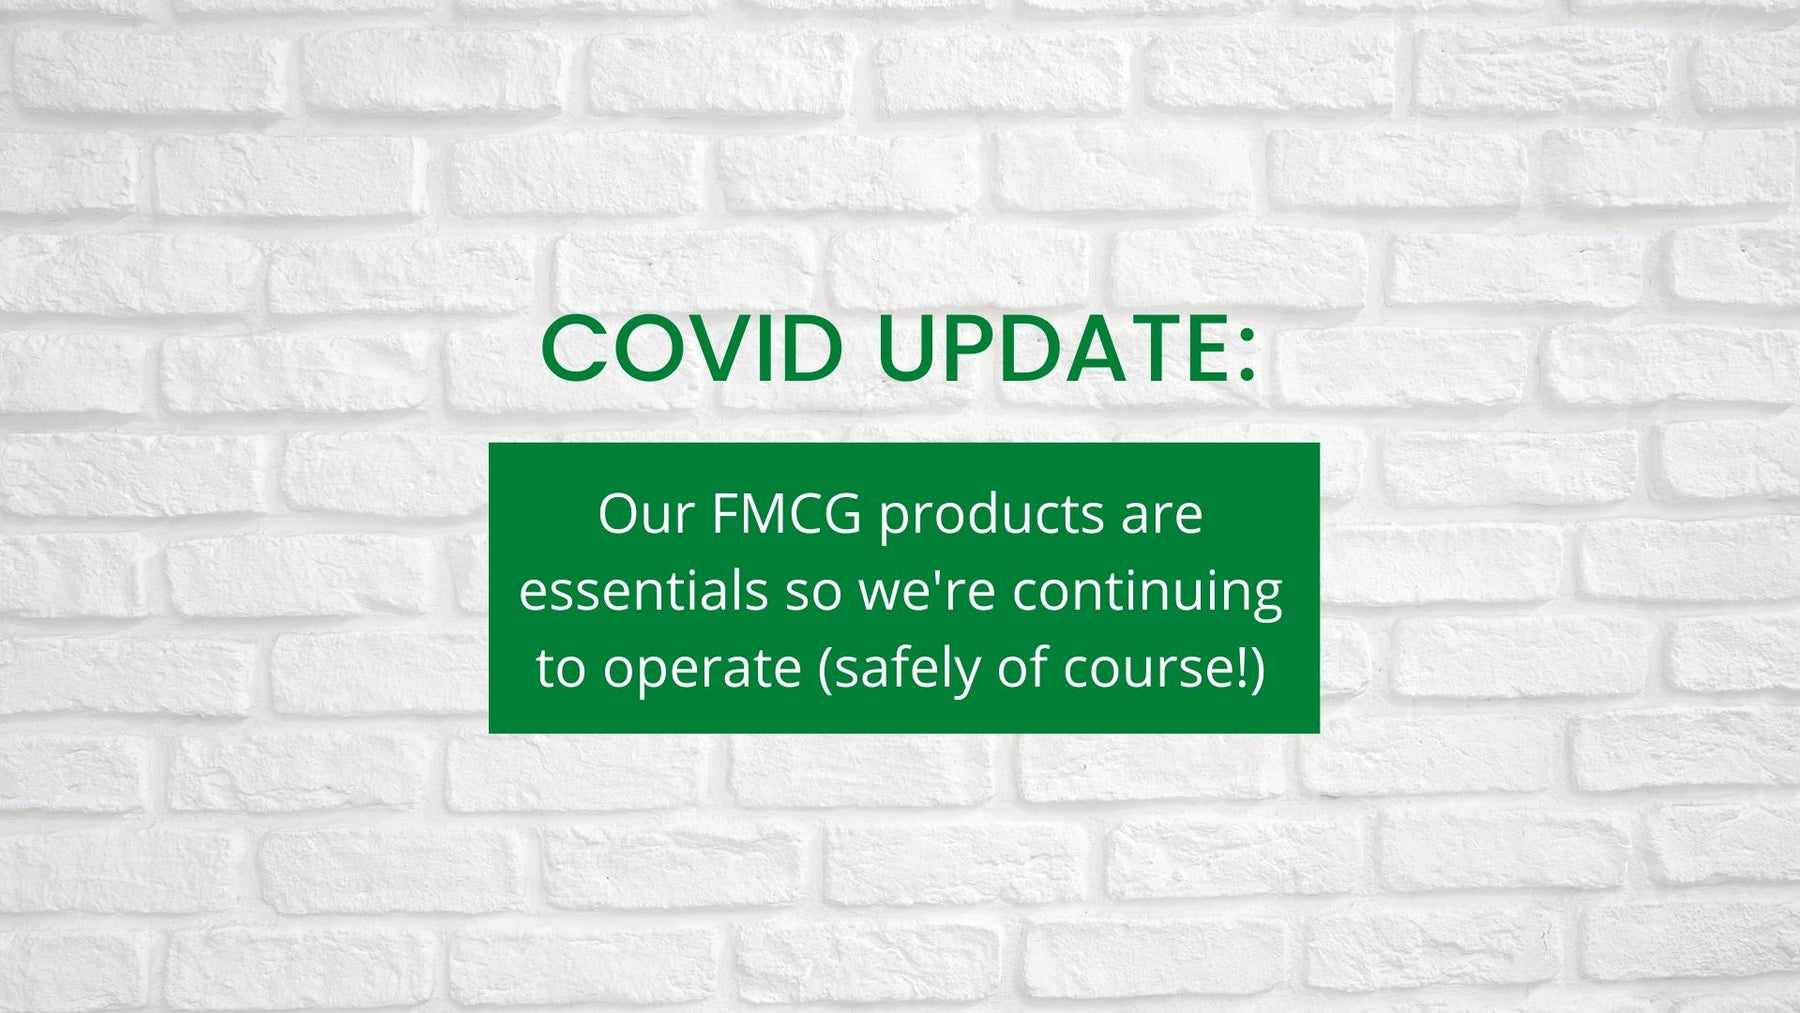 Our FMCG products are essentials so we're still operational